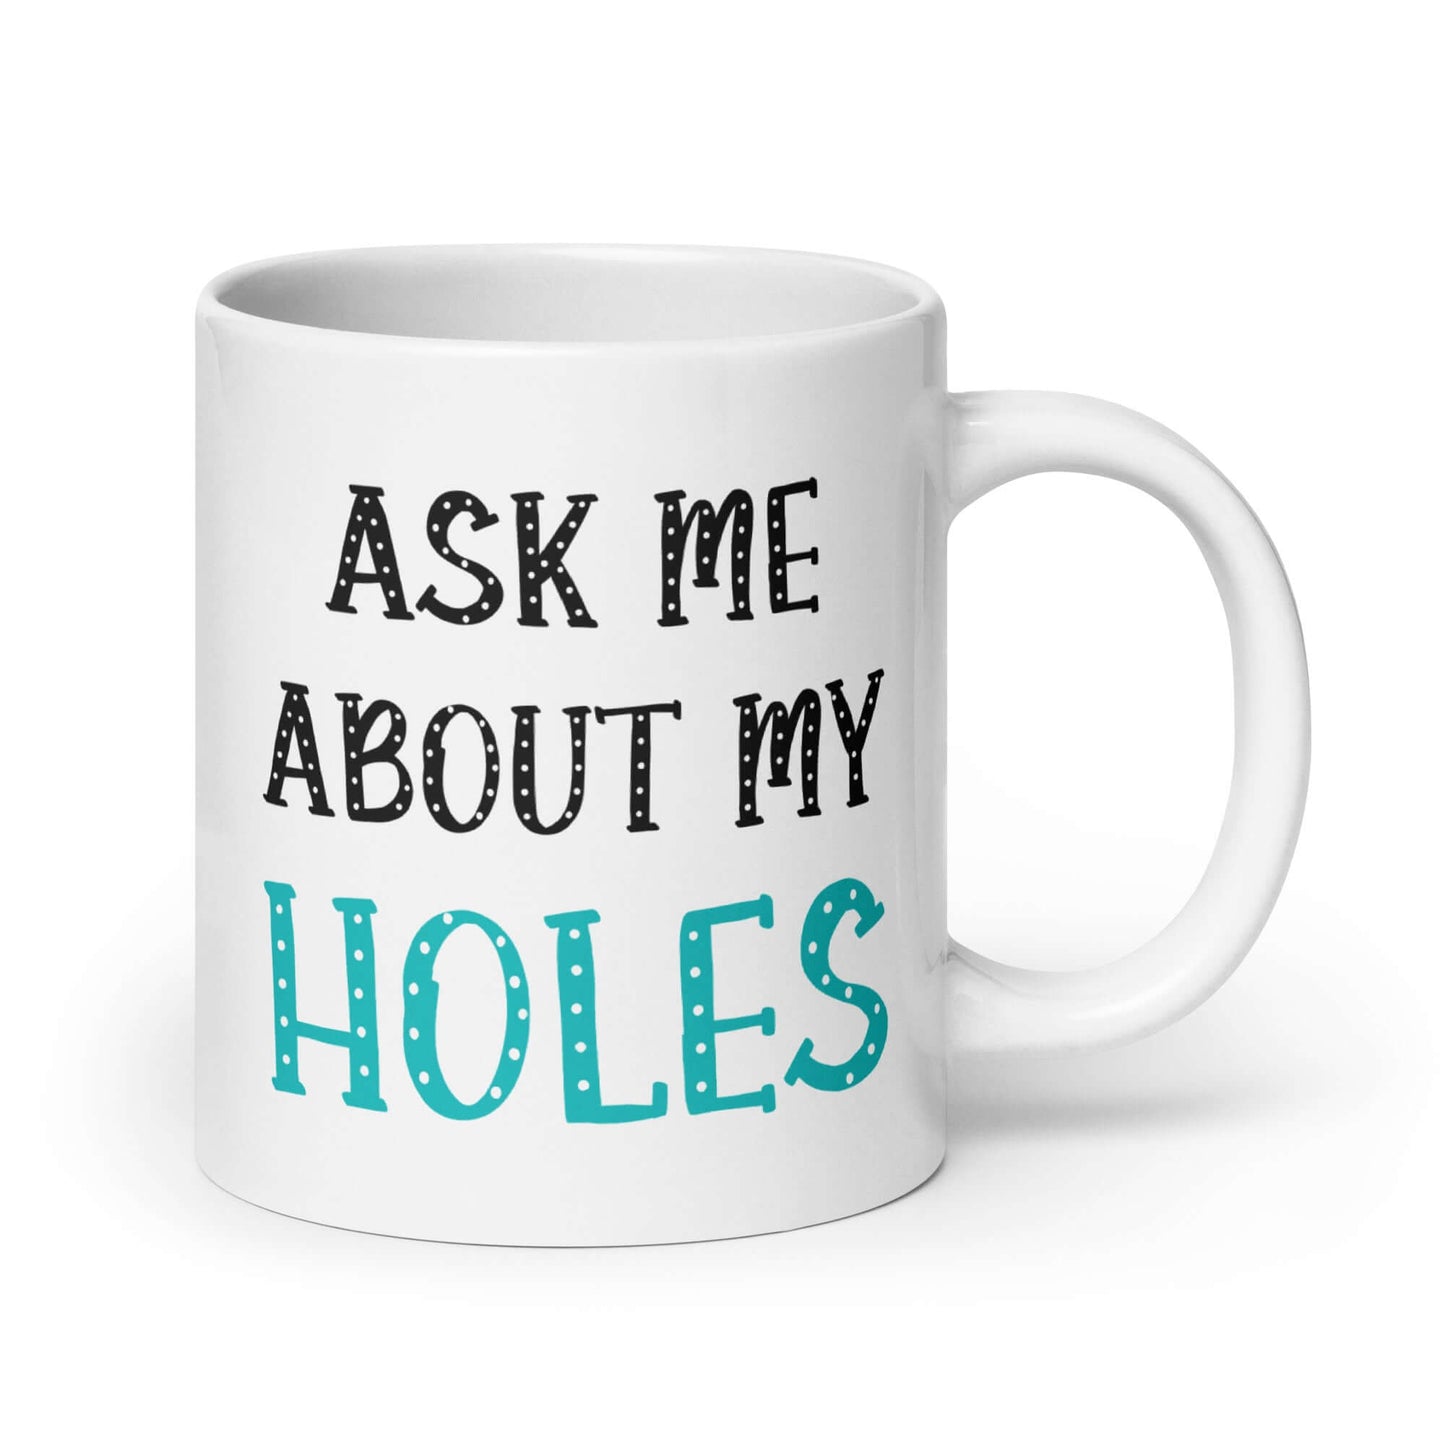 Ask me about my holes suggestive humor ceramic mug